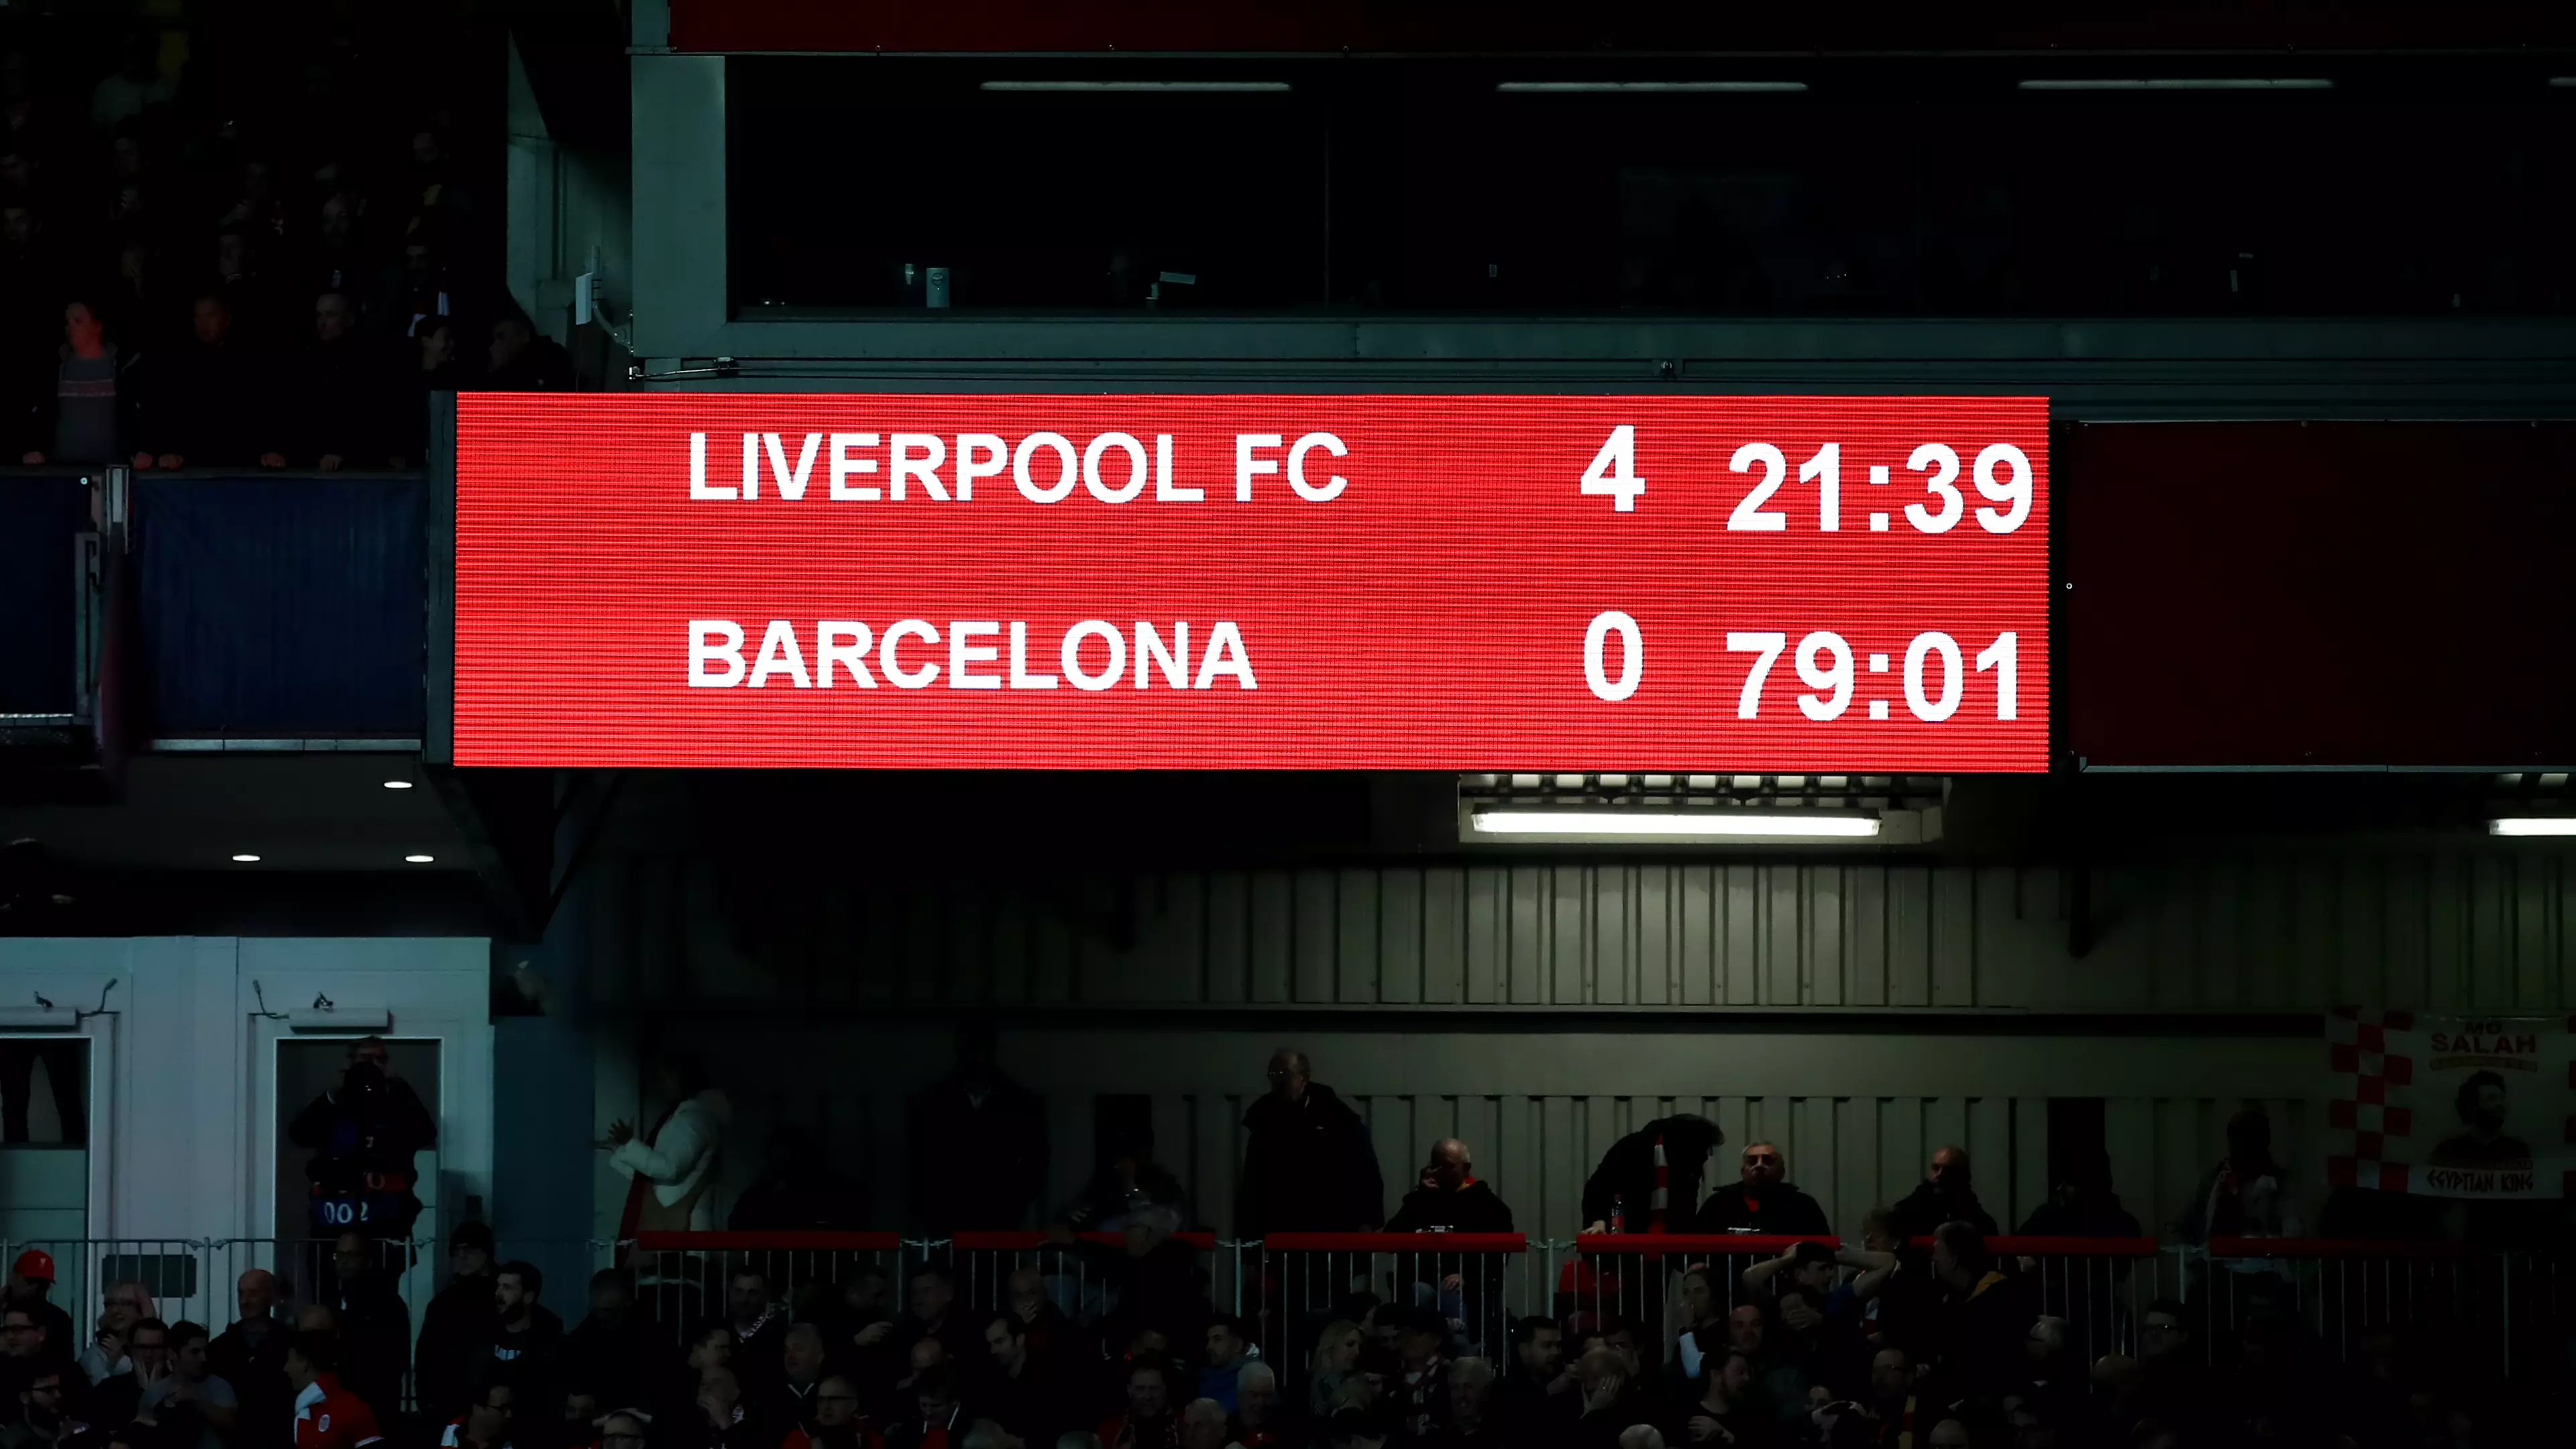 Liverpool Beat Barcelona 4 - 0 To Qualify For Champions League Final